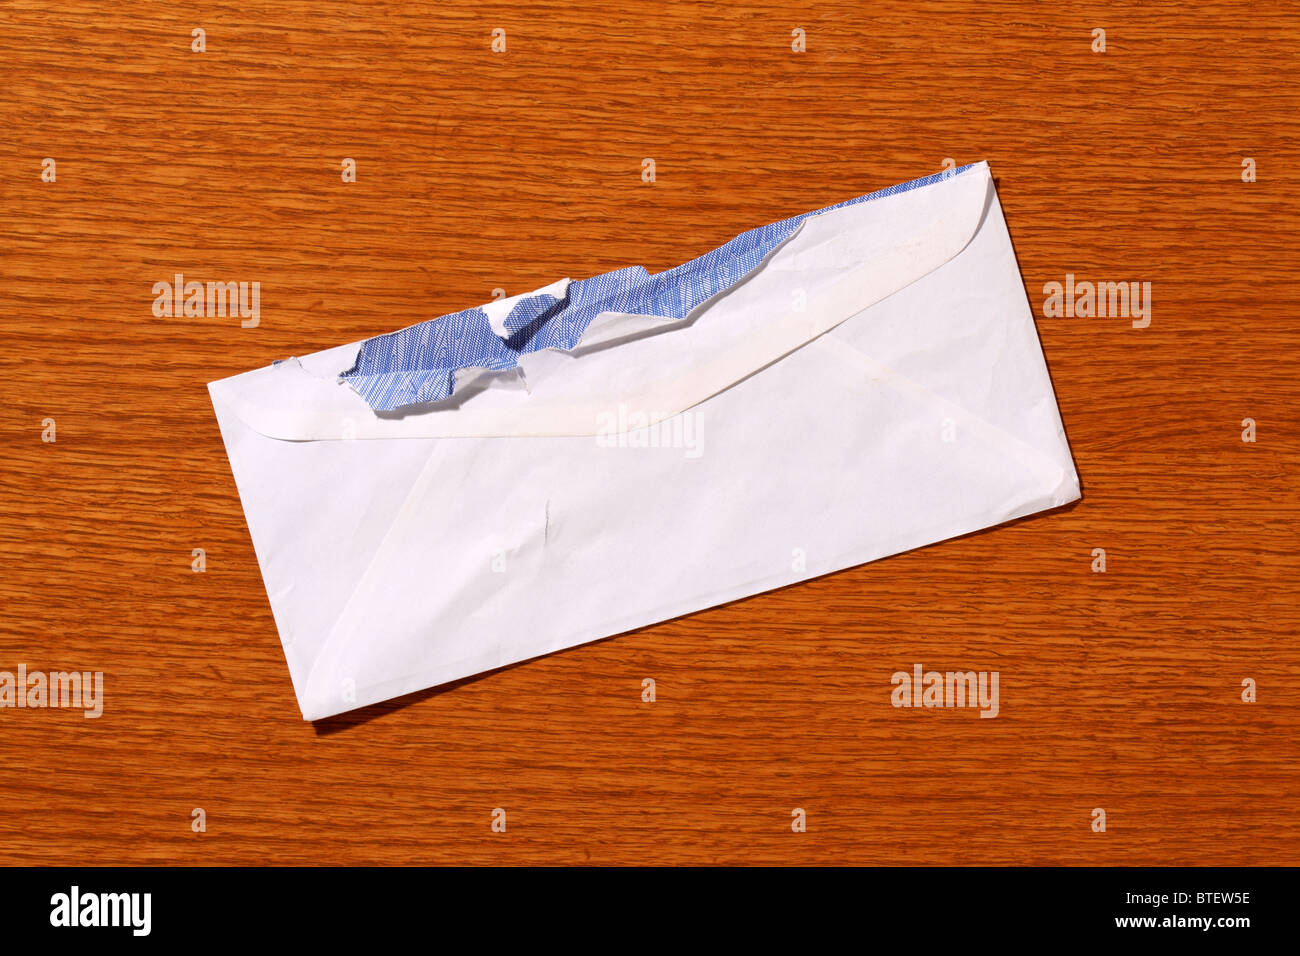 A used postal mailing envelope torn open. Brown wood grained background Stock Photo